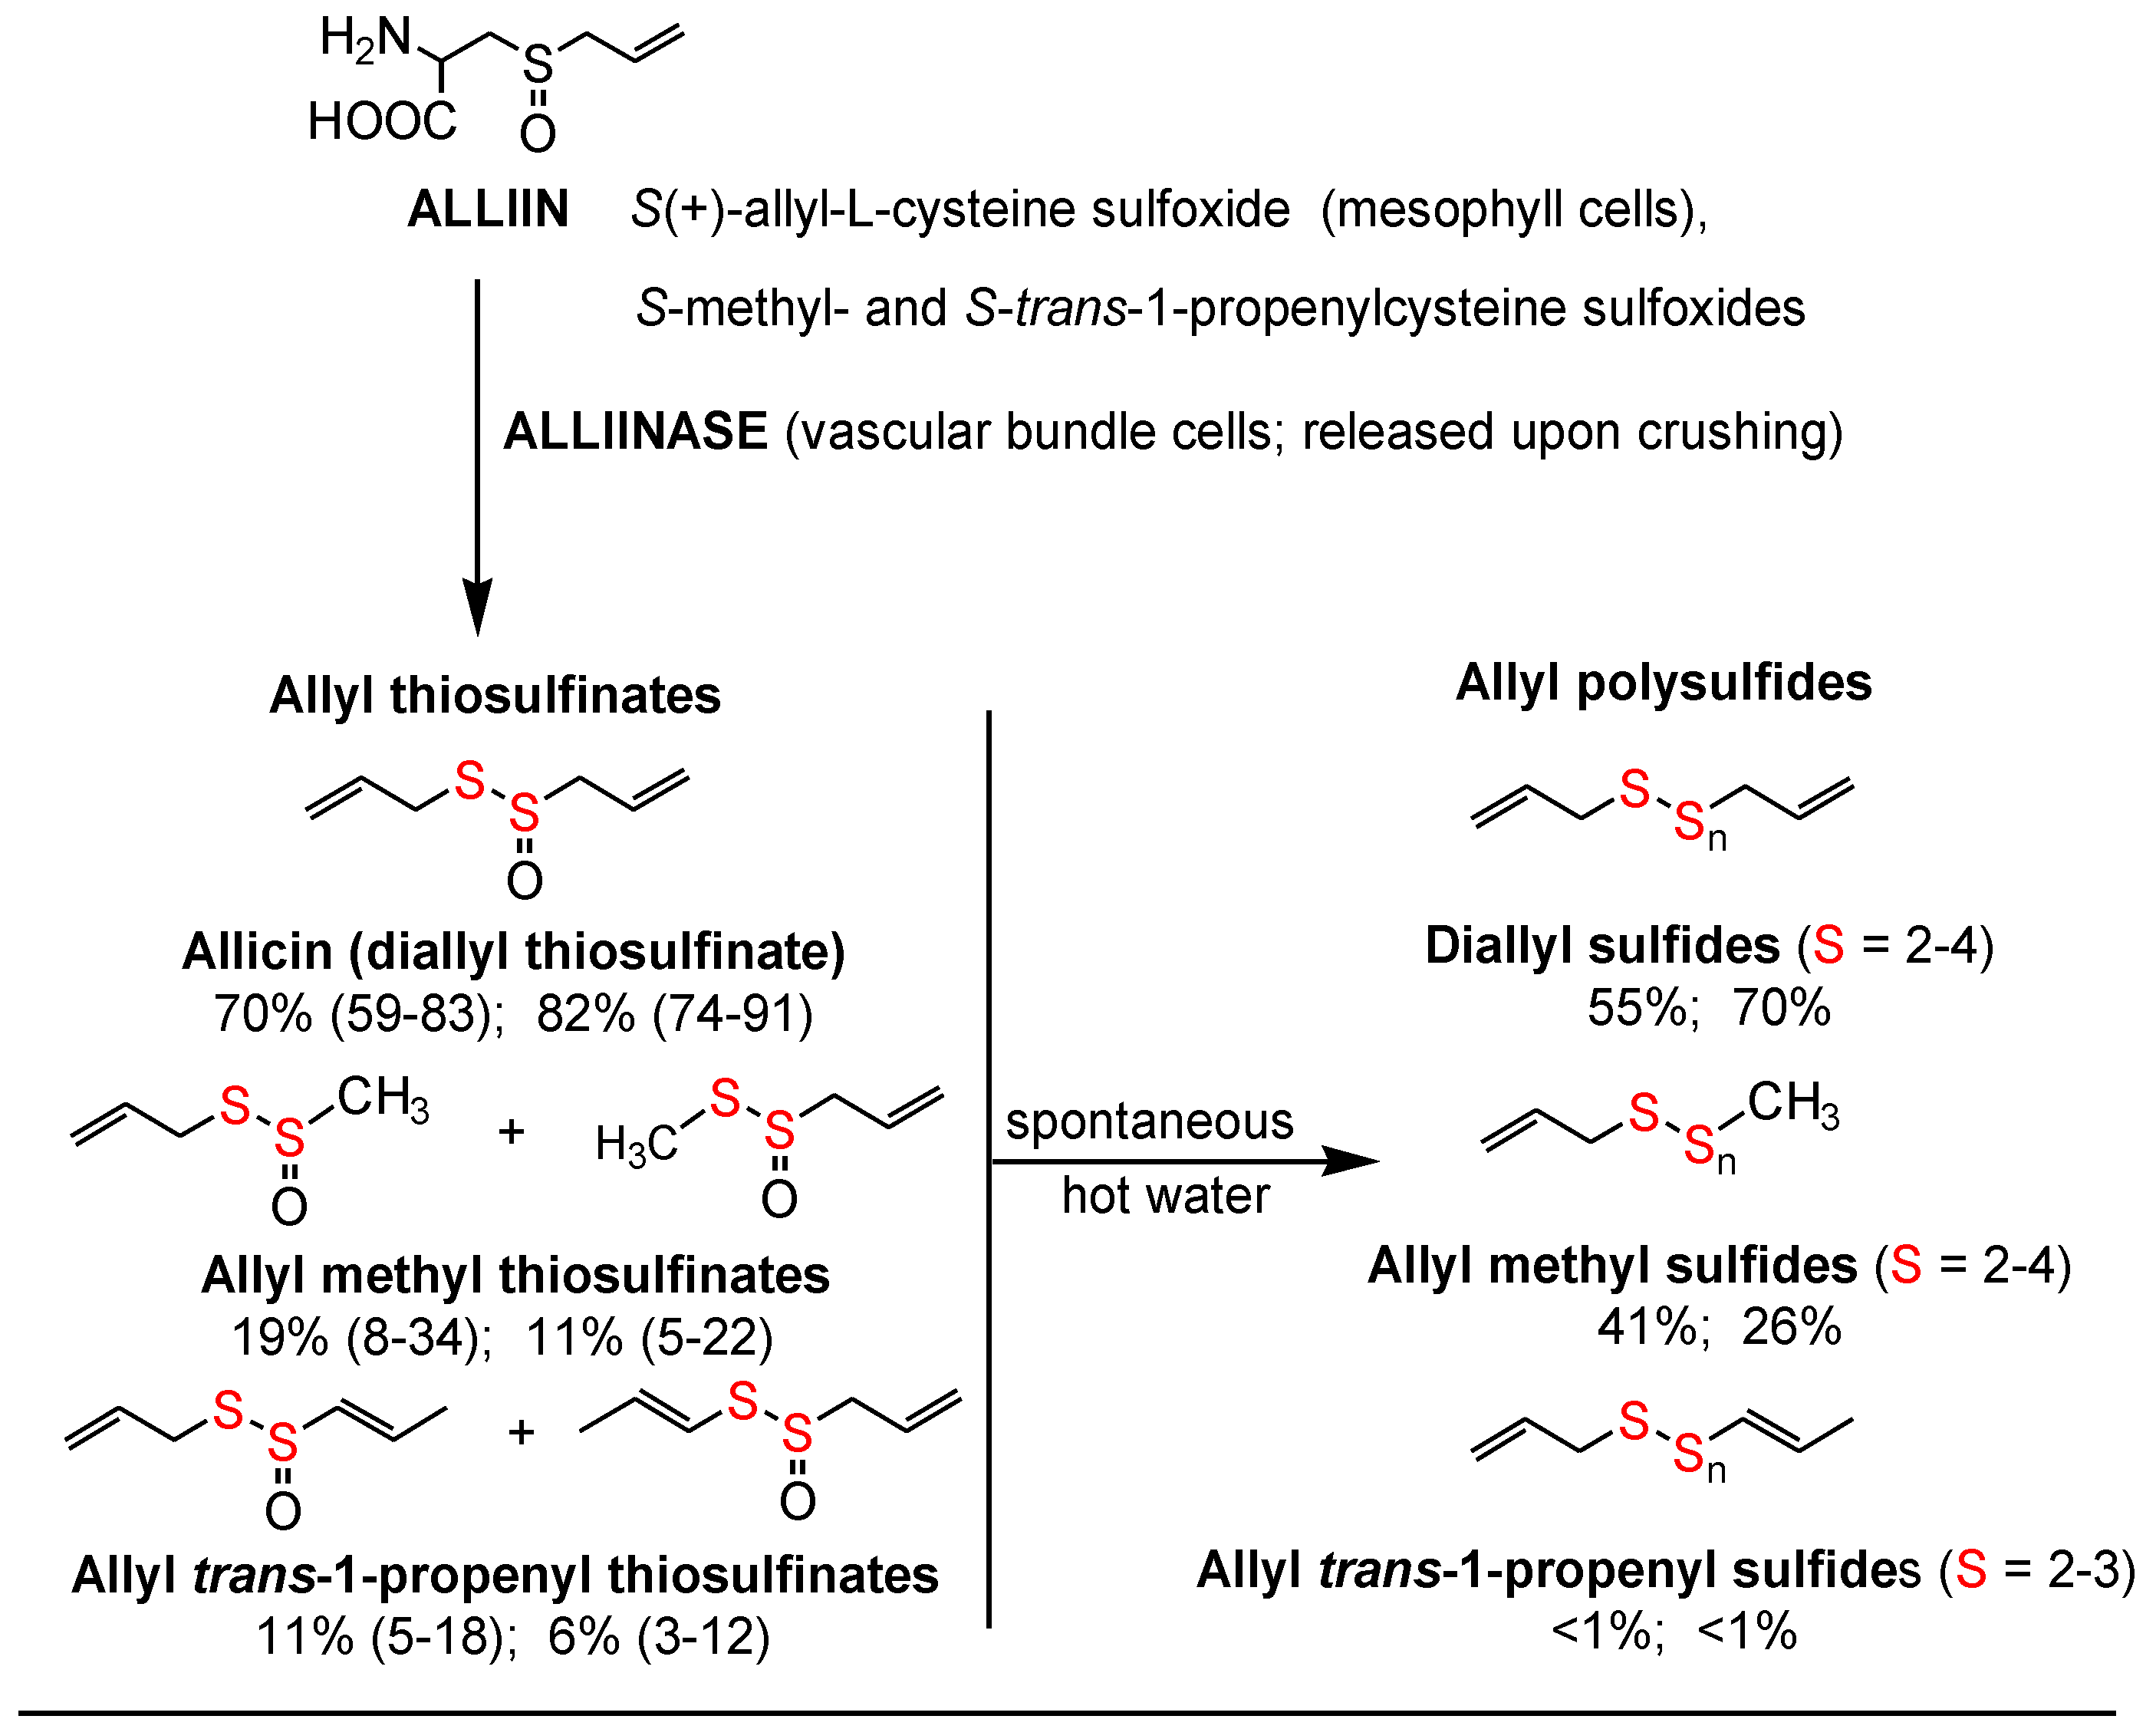 https://www.mdpi.com/nutrients/nutrients-10-00812/article_deploy/html/images/nutrients-10-00812-g001a.png